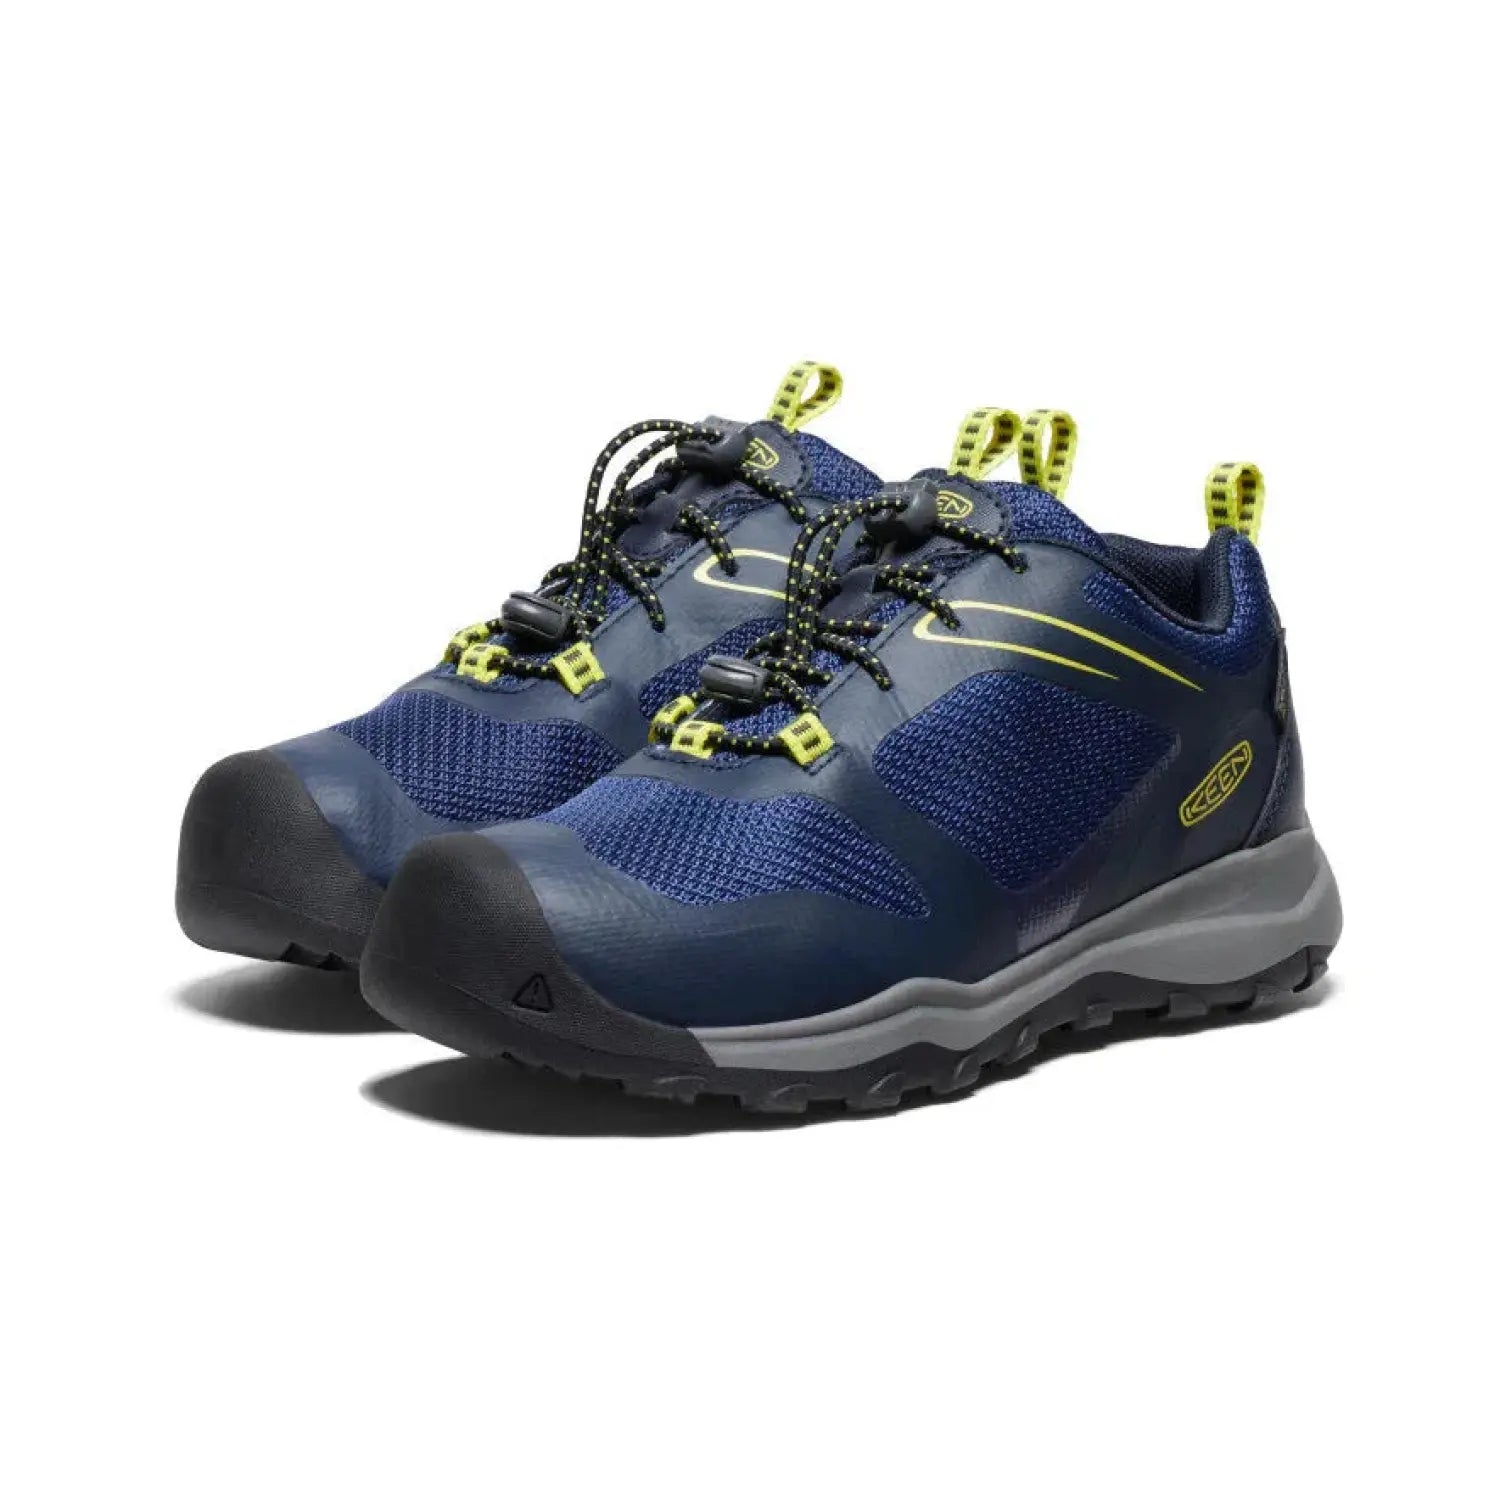 Keen Wanduro Waterproof Shoe in Sky Captain blue and Evening blue with pull laces. Shown as a pair at an angle.